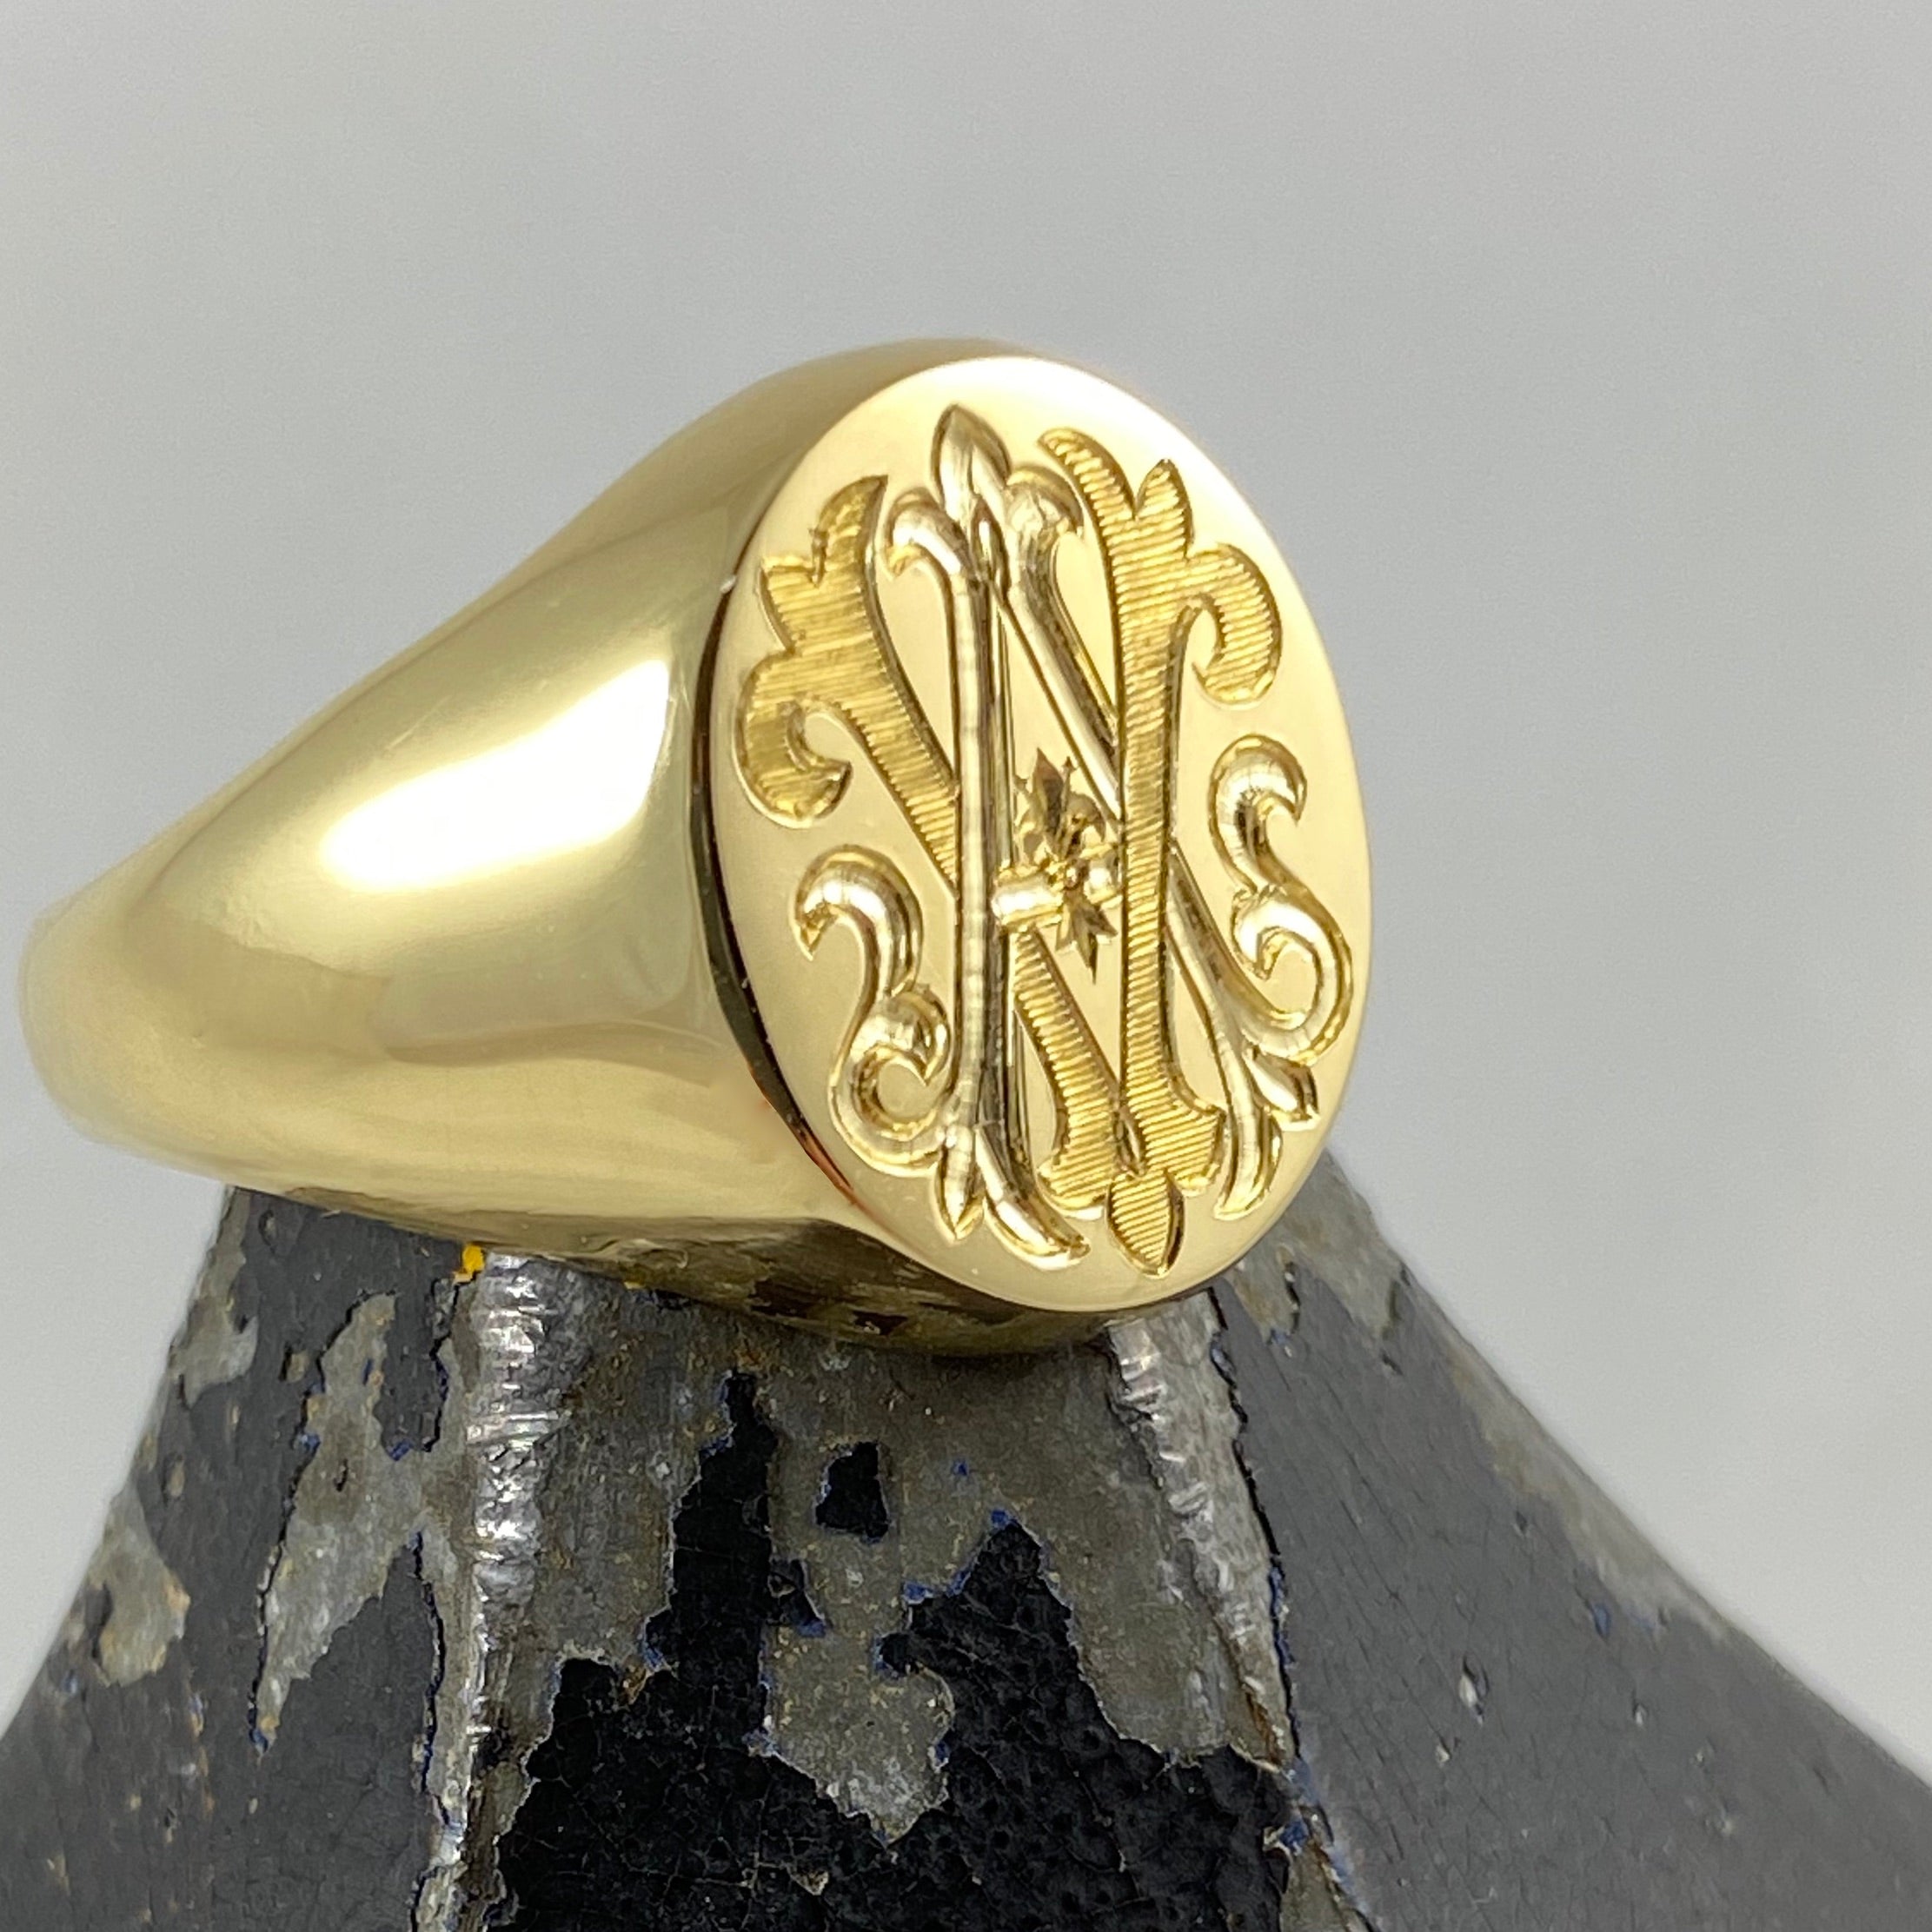 Family Crest Seal Engraved 14mm X 12mm 18 Carat Yellow Gold Signet Ring ...